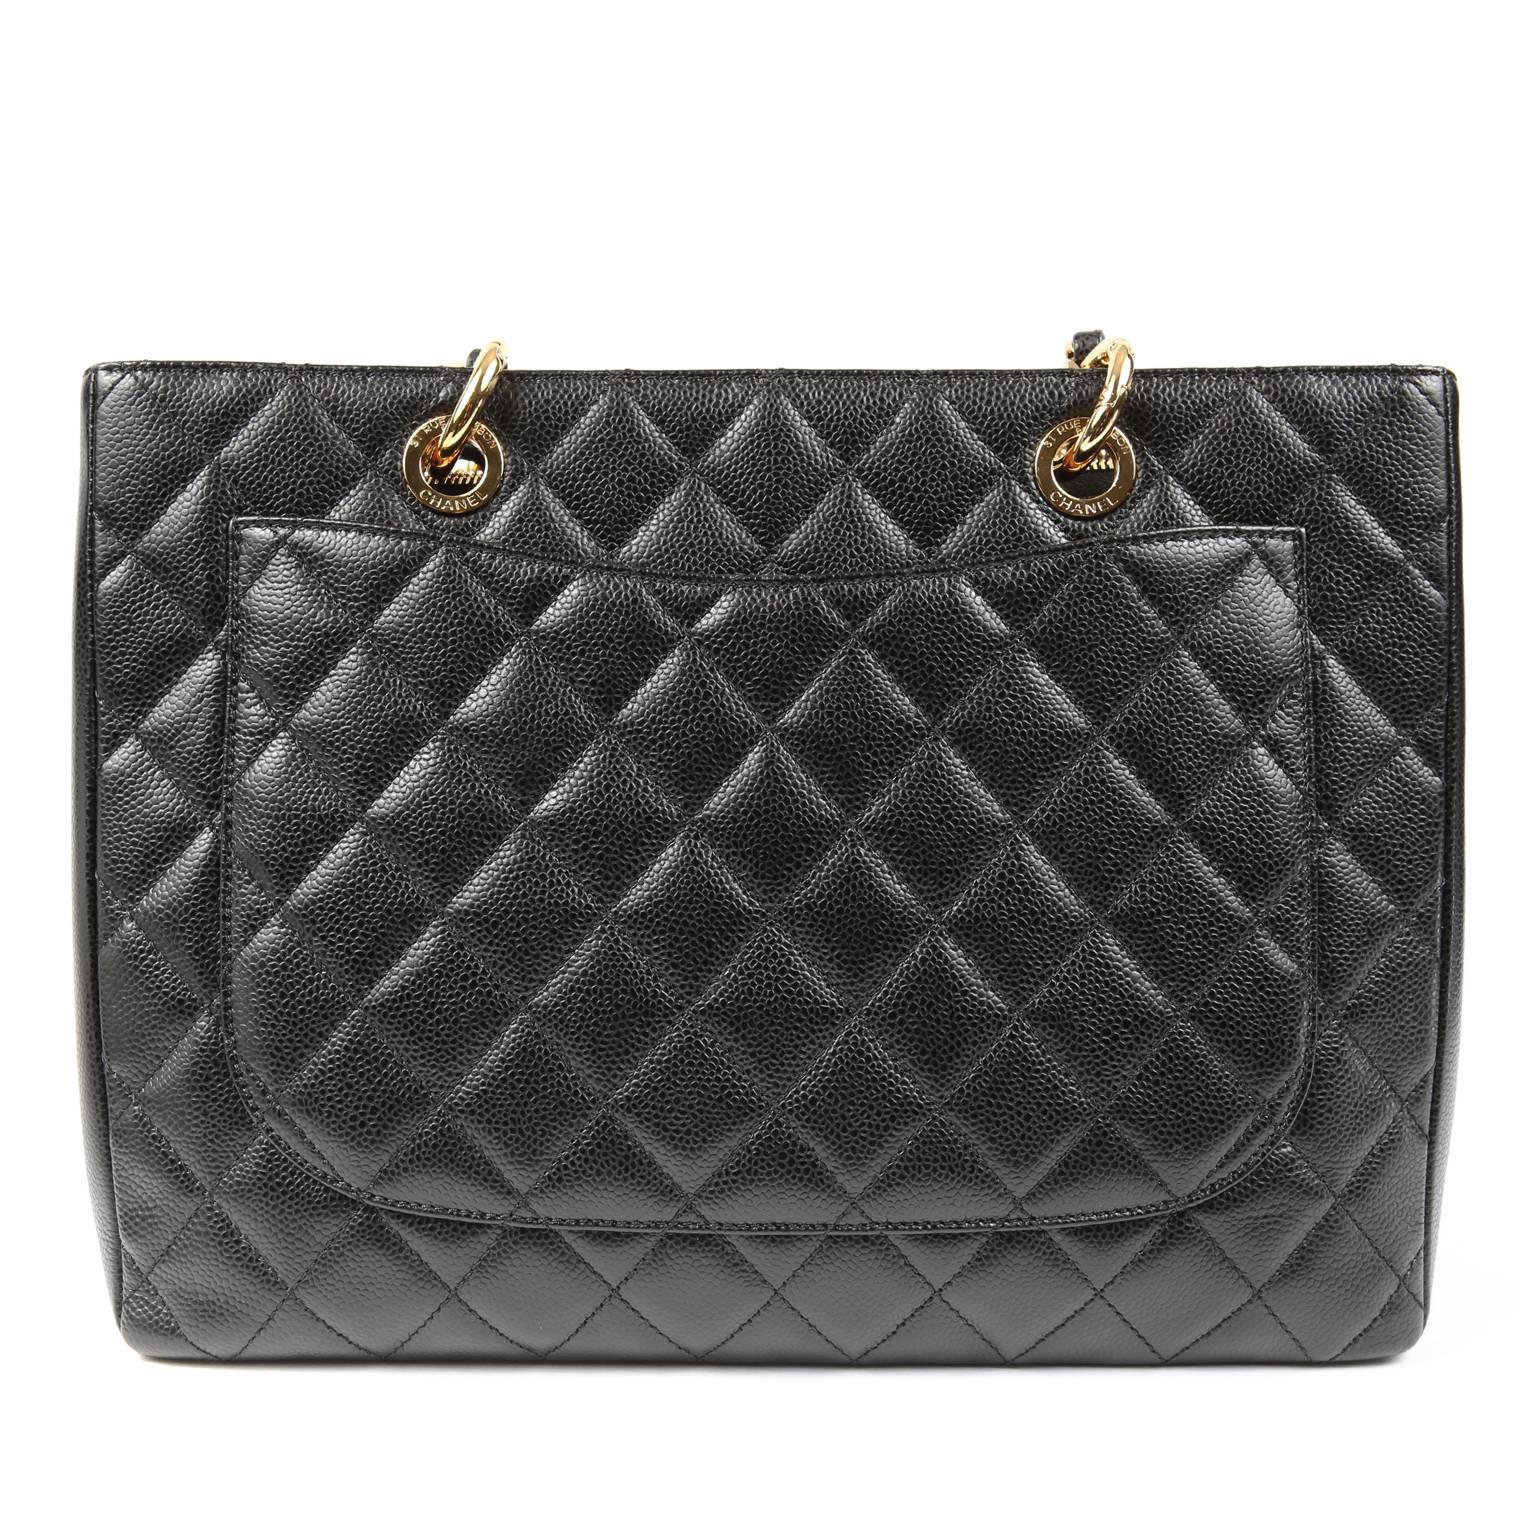 Chanel Black Caviar GST- PRISTINE
  The GST, or Grand Shopping Tote, is part of the Classics Collection and is certain to hold its value. 

Textured and durable black caviar leather is quilted in signature Chanel diamond pattern.  Colossal